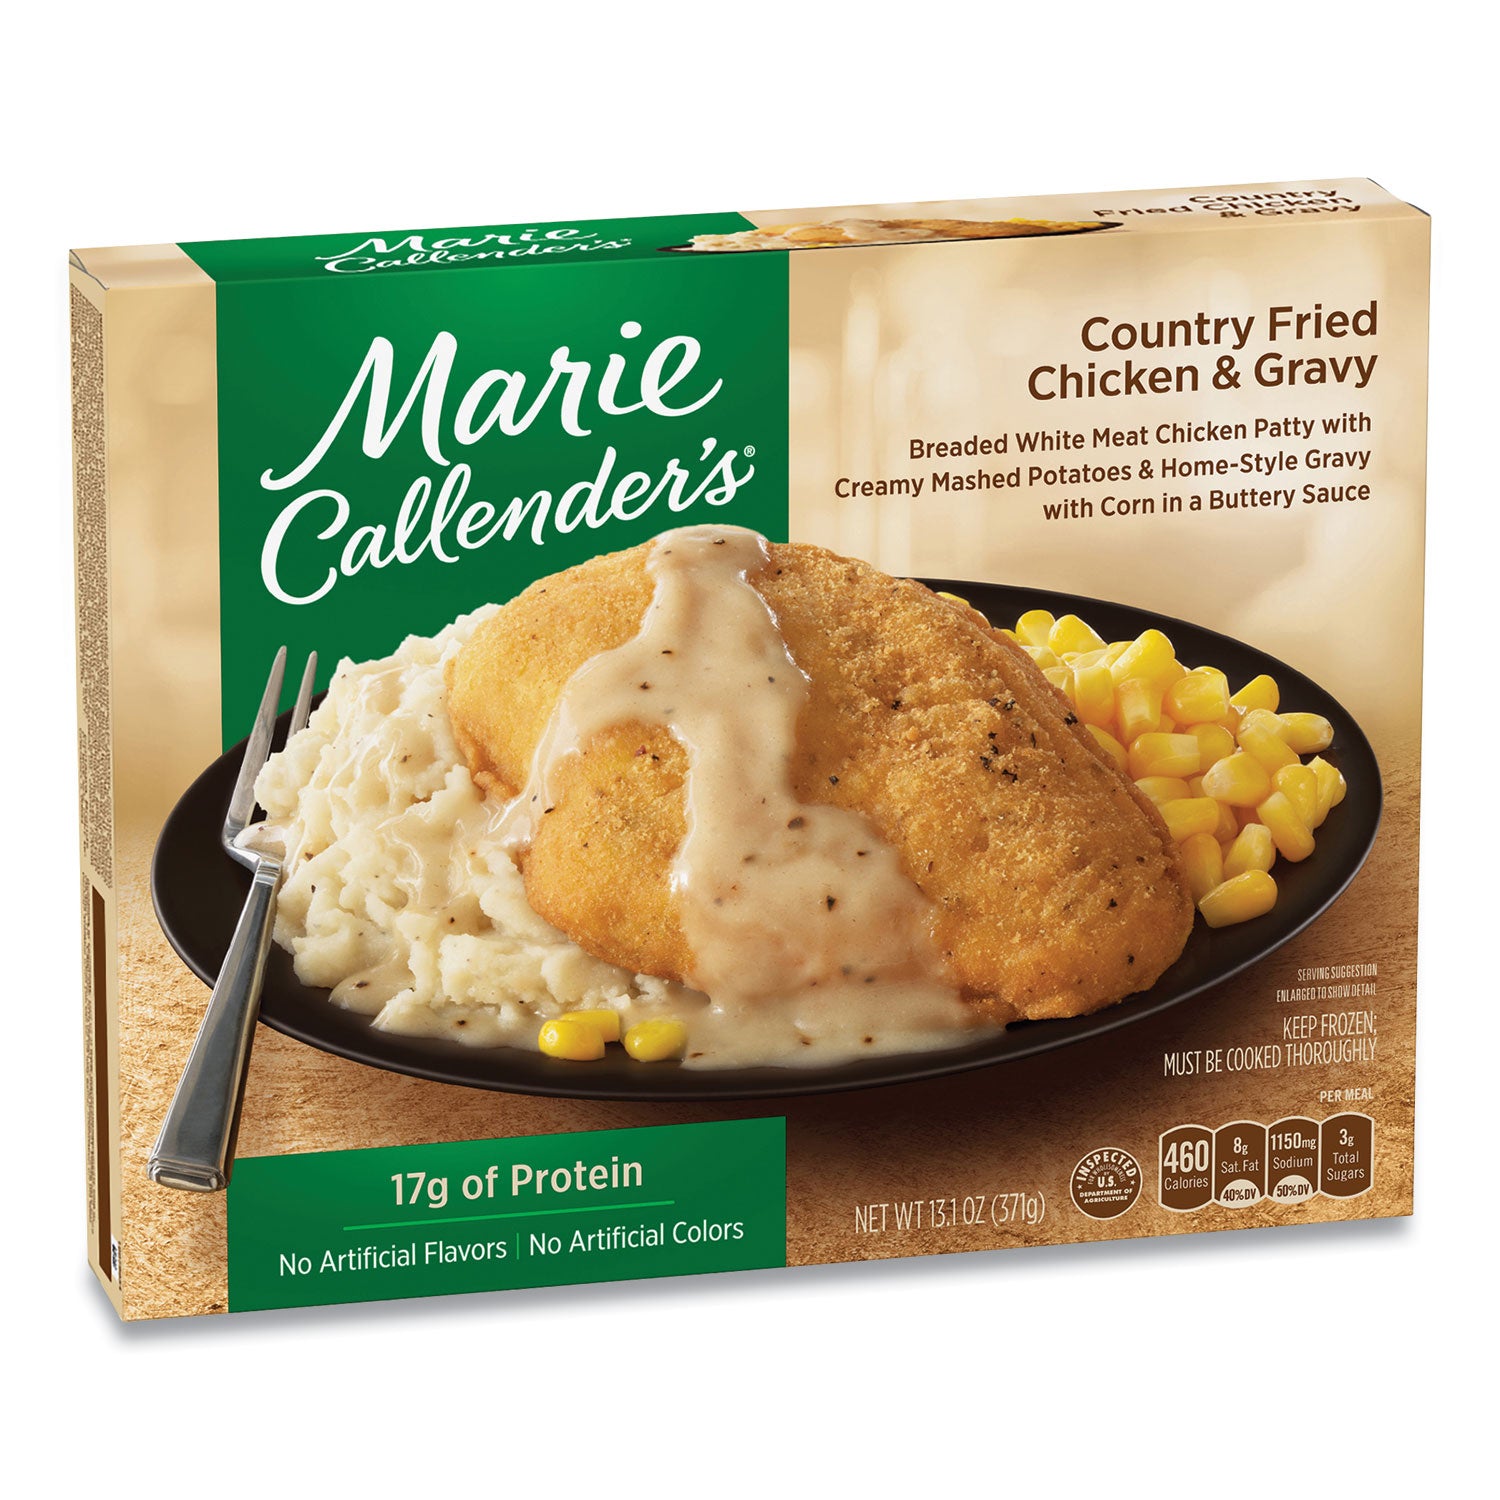 country-fried-chicken-and-gravy-131-oz-bowl-5-pack-ships-in-1-3-business-days_grr90300169 - 4